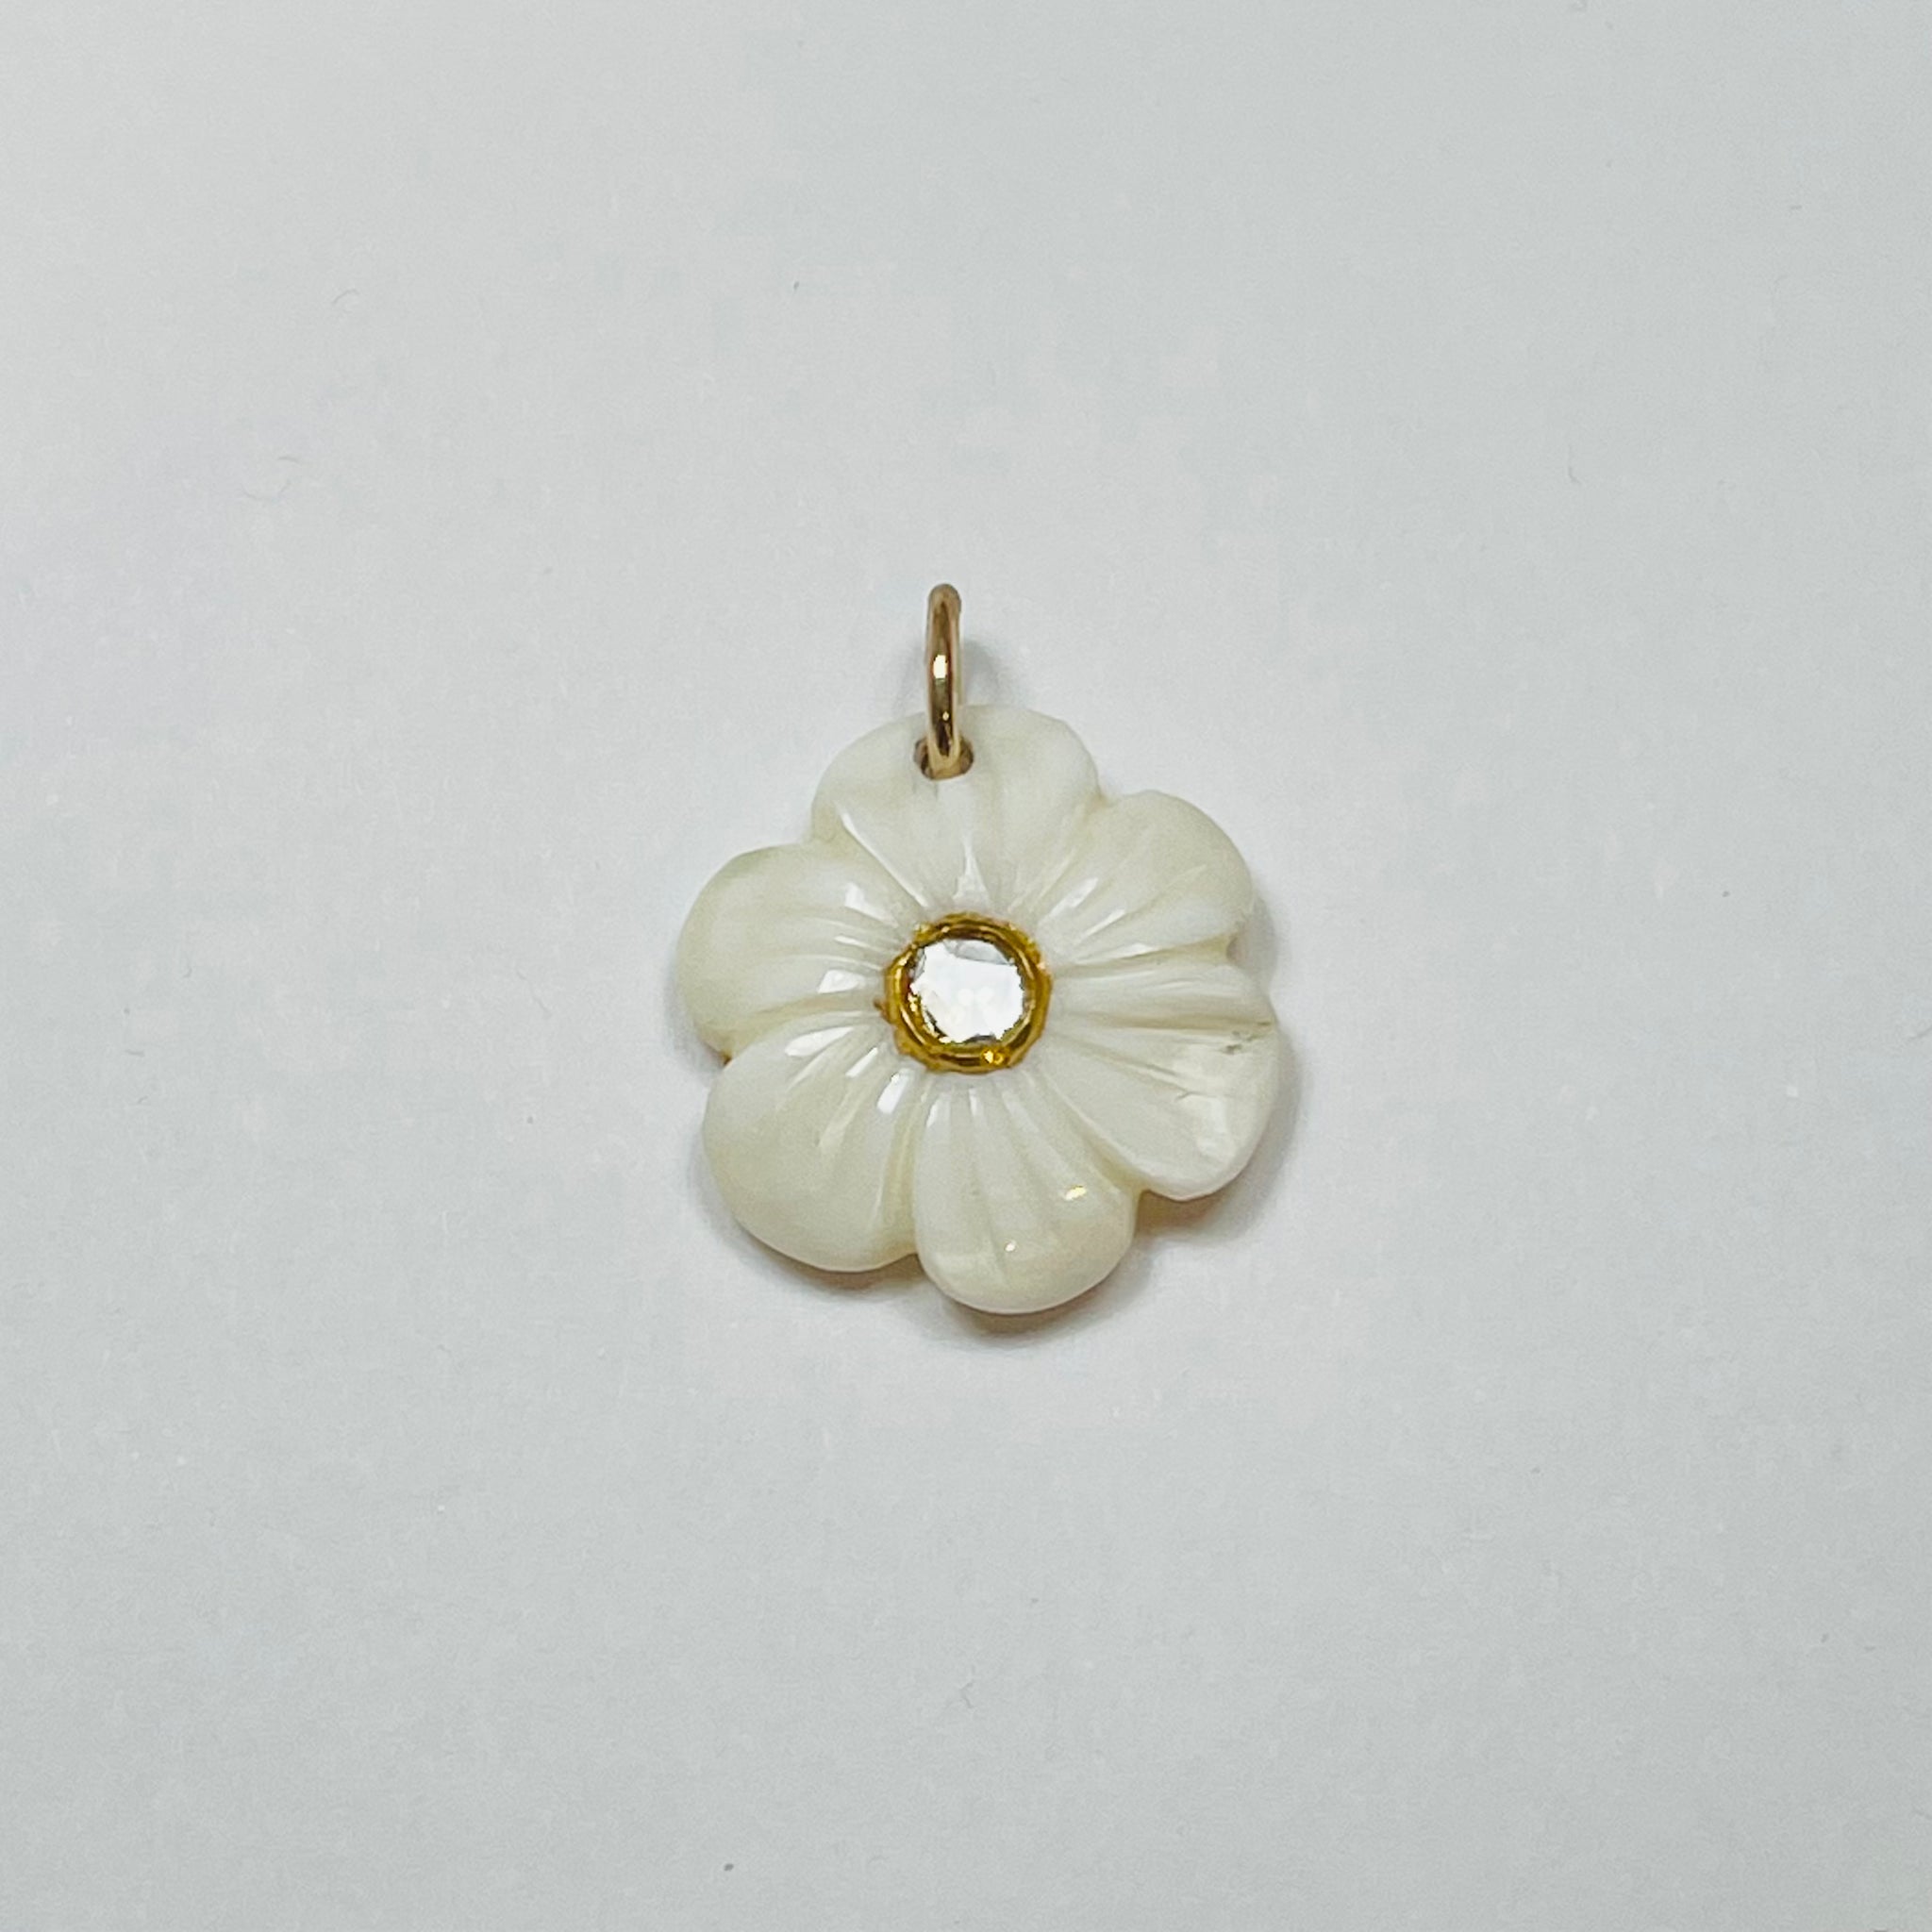 carved white agate flower pendant, 3/4 in